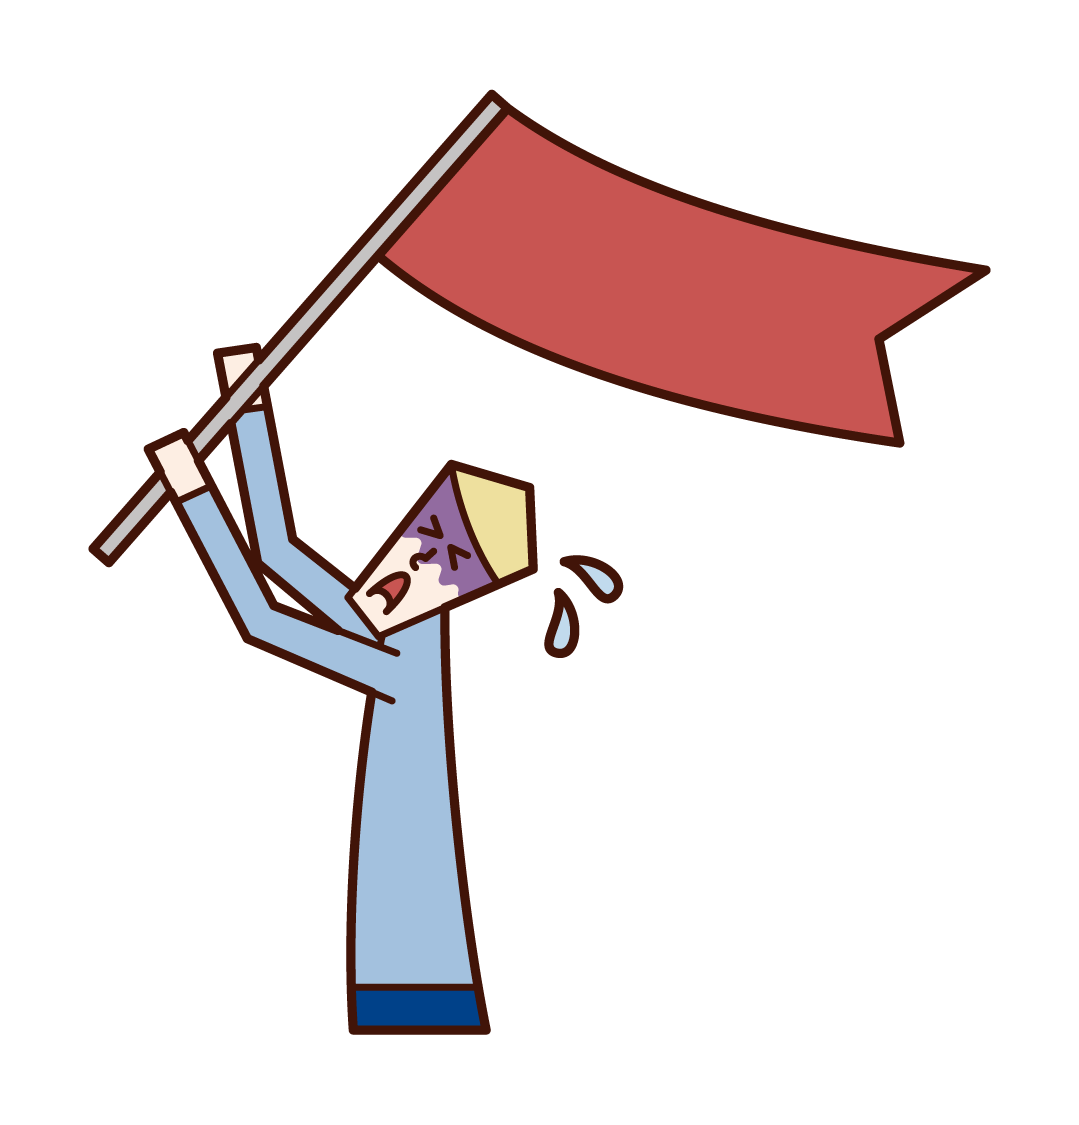 Illustration of a man waving a flag and asking for SOS